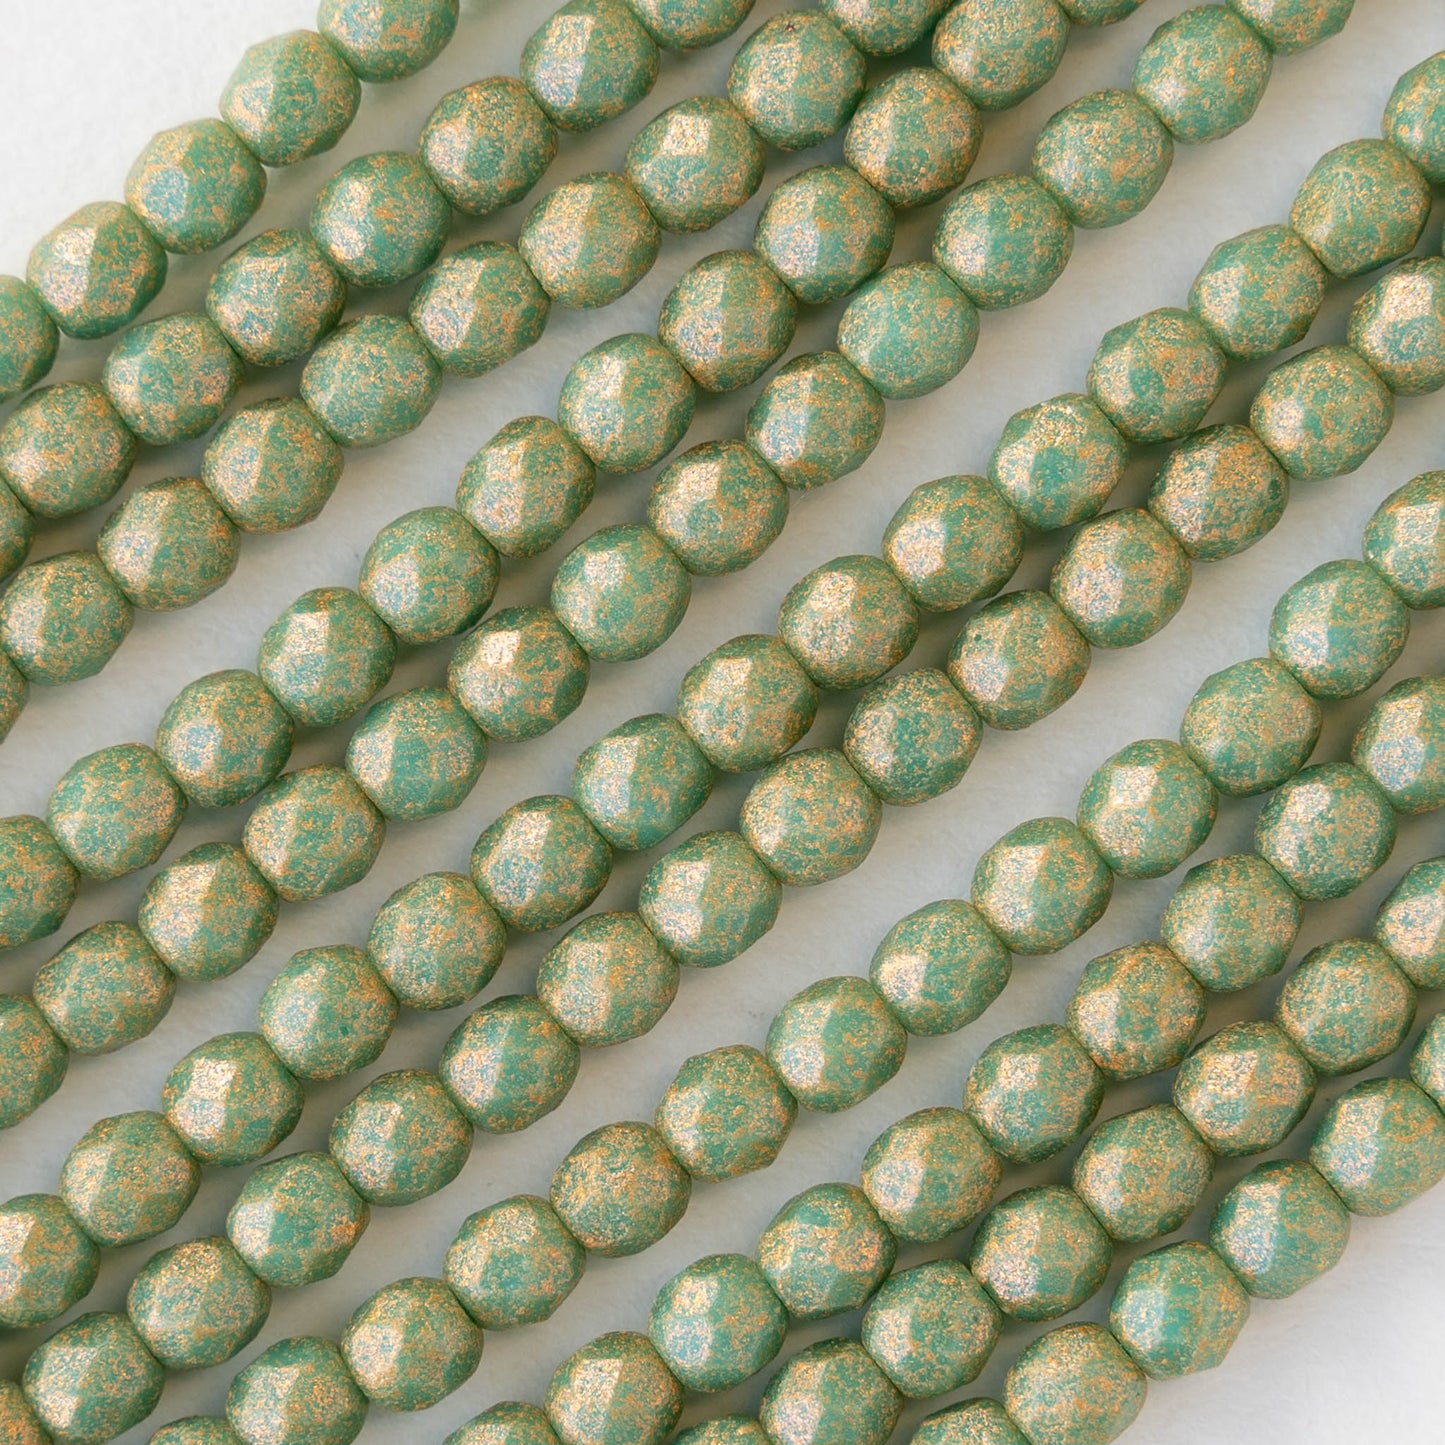 4mm Round Firepolished Beads - Antique Turquoise Shimmer - 50 beads